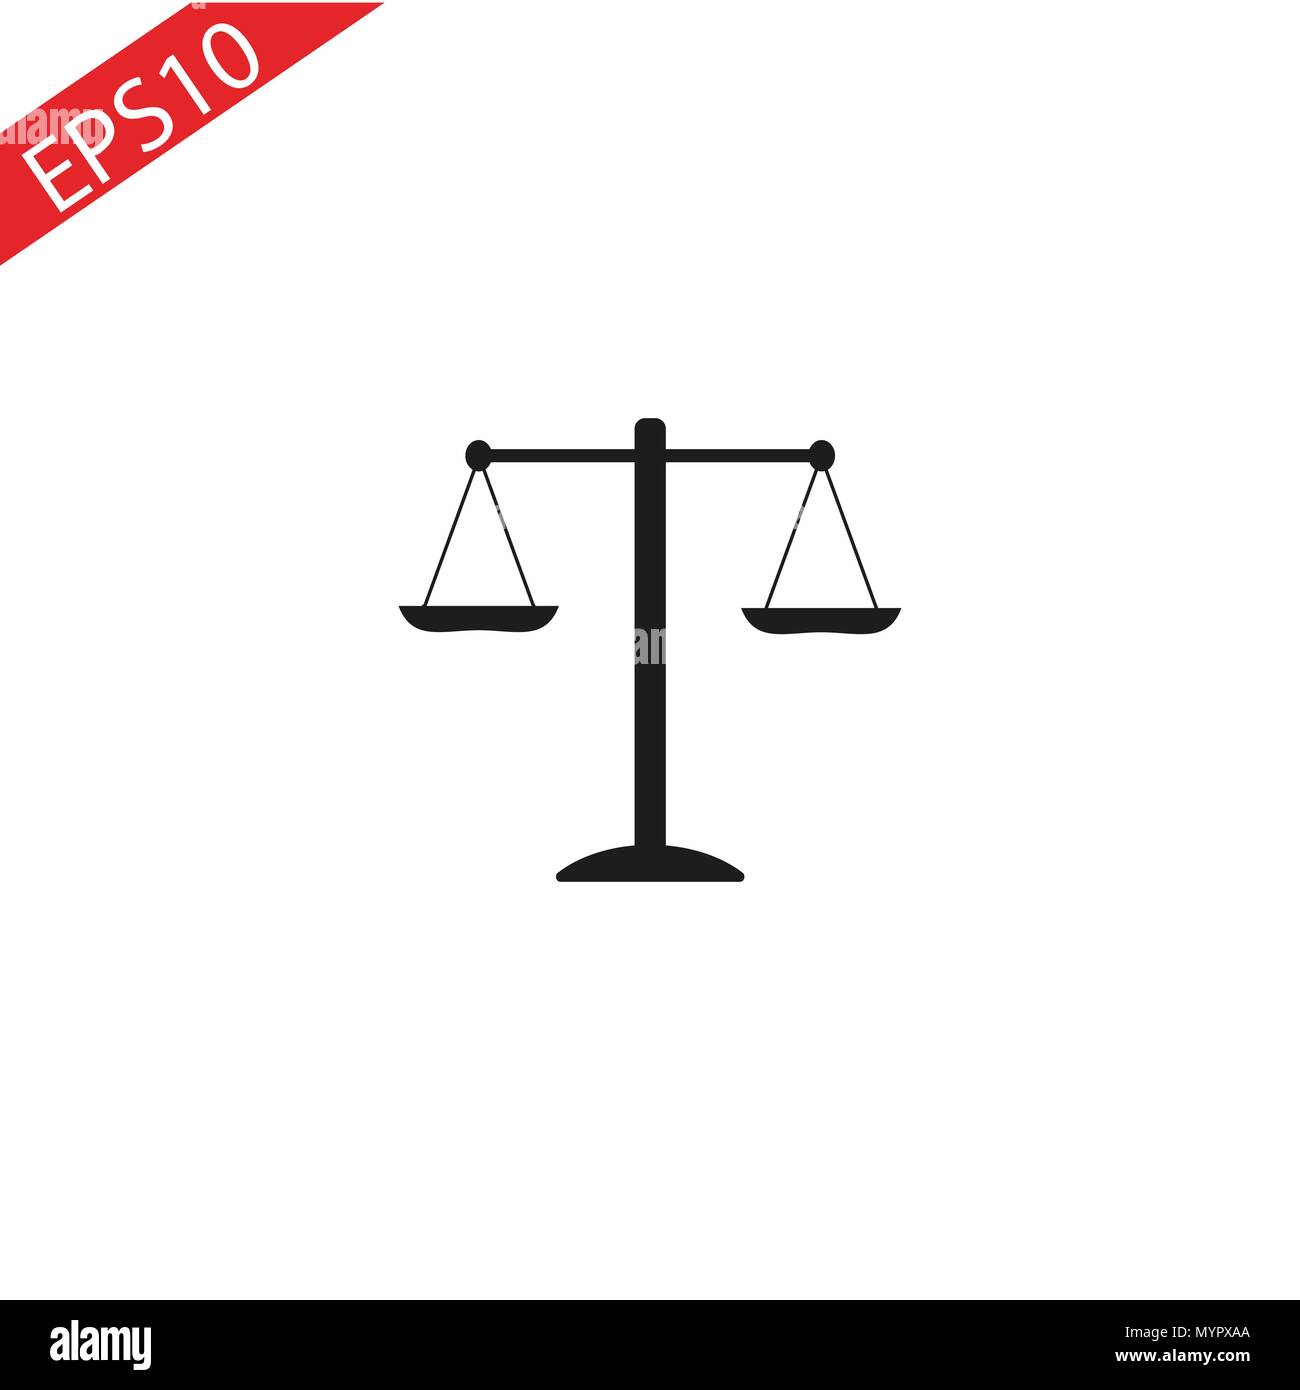 Black Justice scale icon on white background Stock Vector